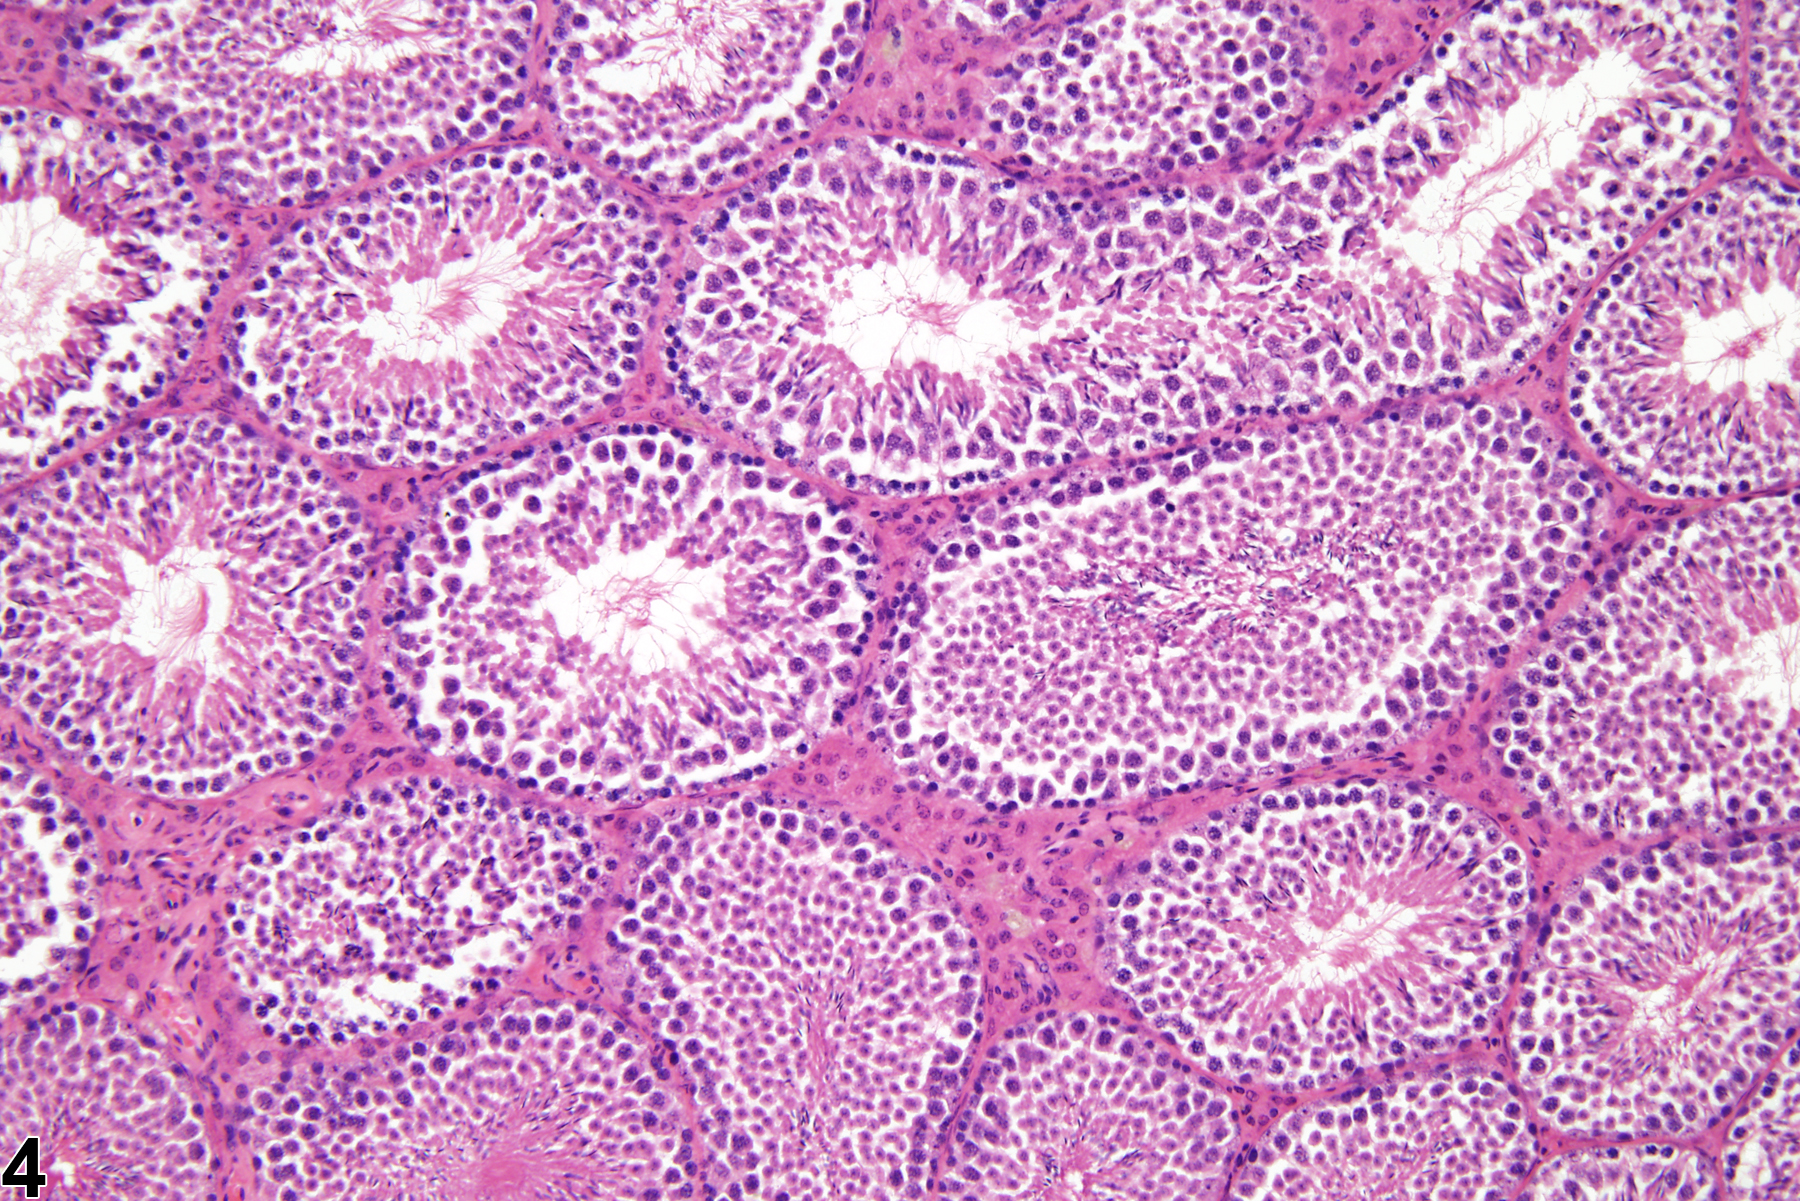 Image of interstitial cell hyperplasia in the testis from a male B6C3F1 mouse in a chronic study